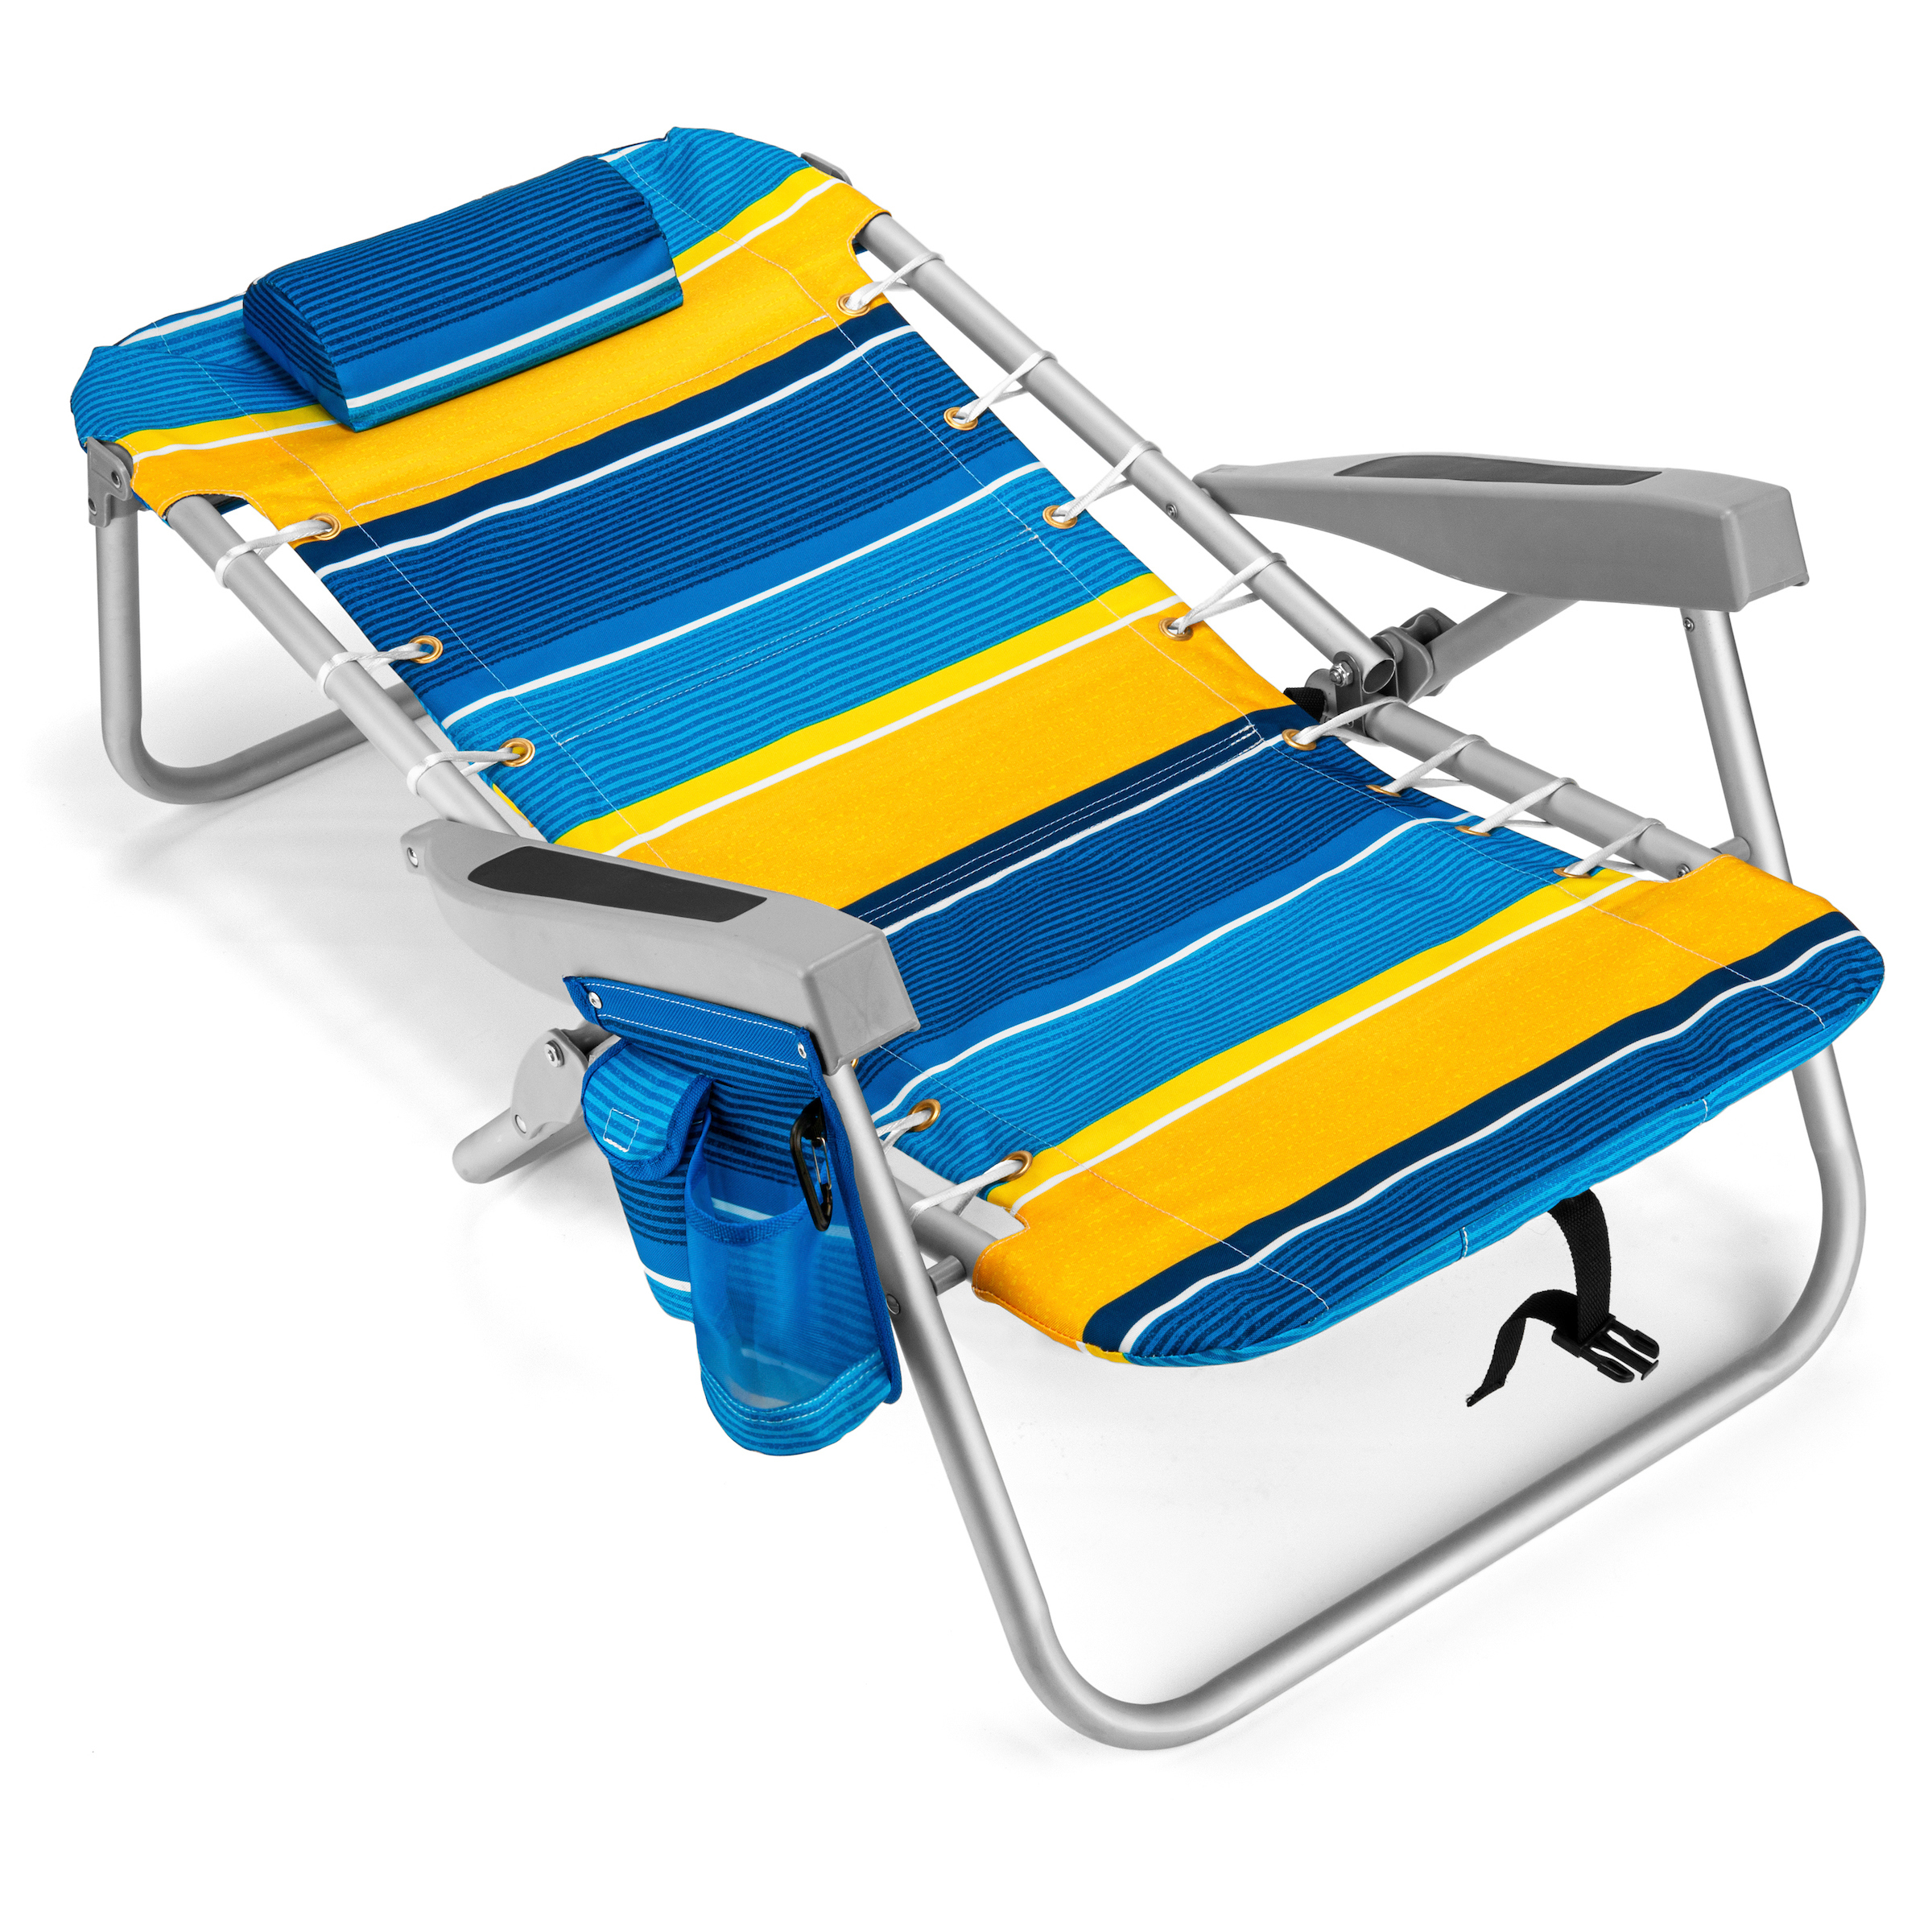 Homevative Folding Backpack Beach Chair with 5 Positions, Towel bar, Blue Yellow - image 4 of 4